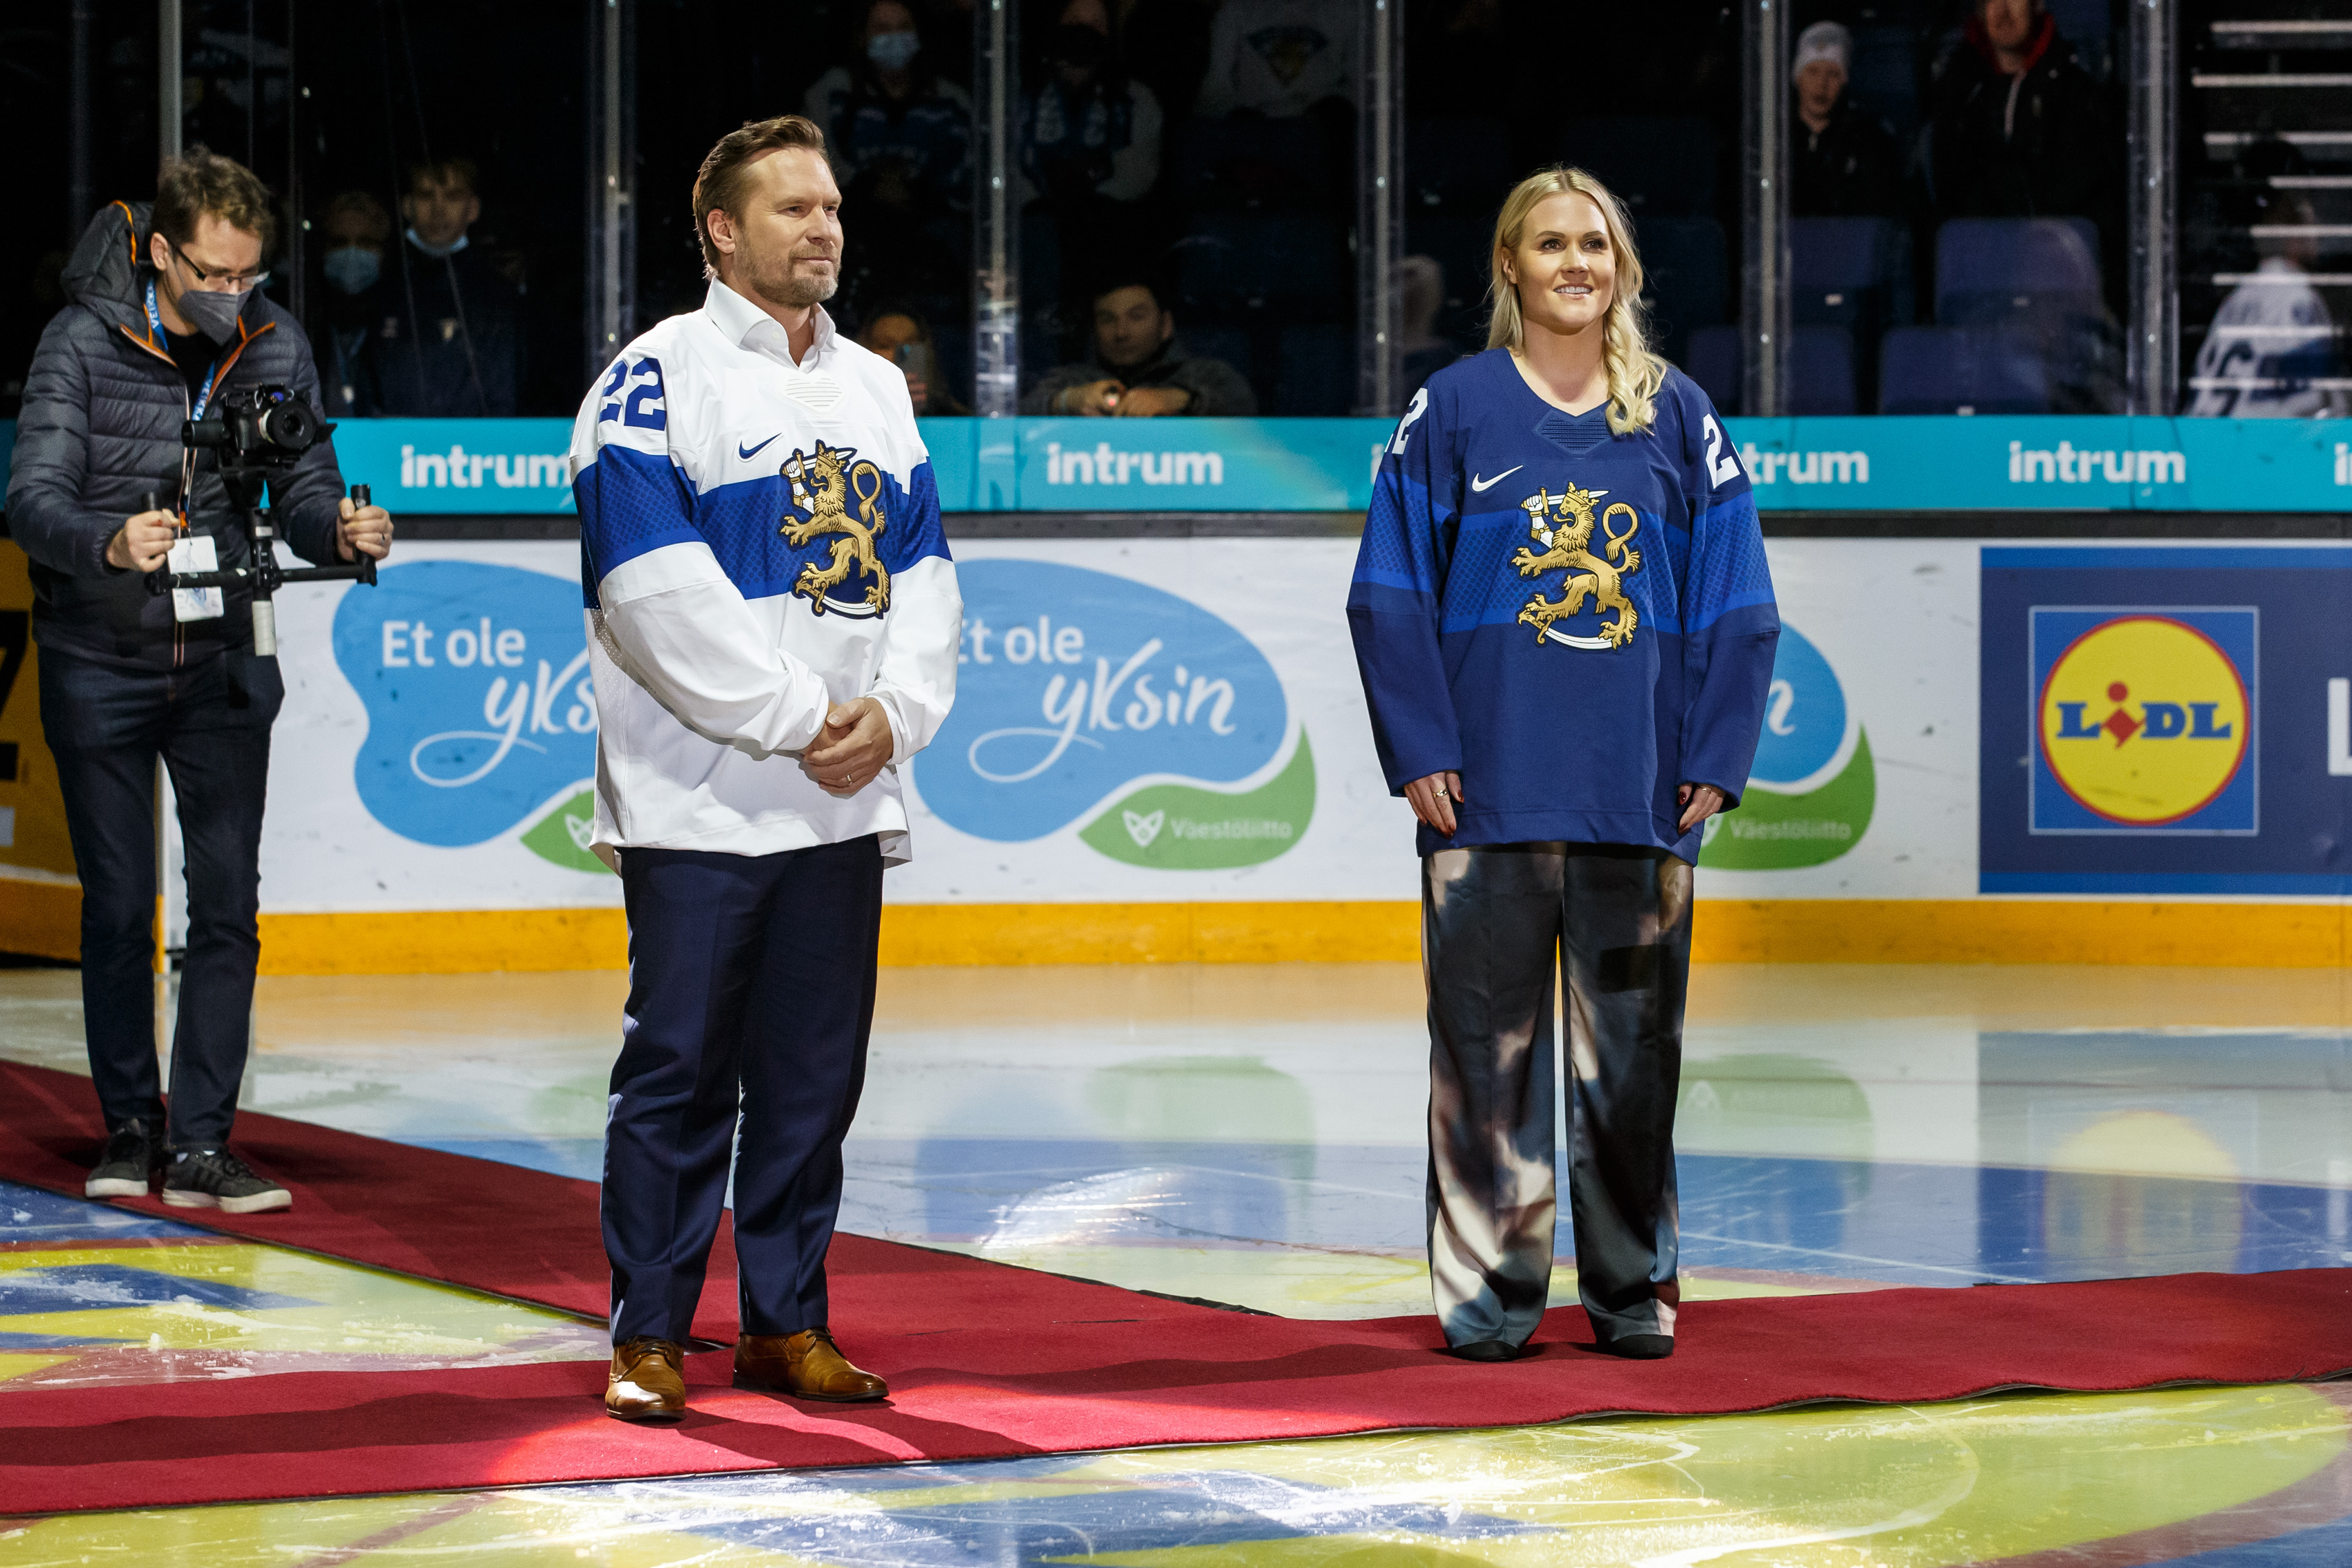 IIHF on X: The @Olympics jerseys were debuted at the Karjala Cup by two  former Finnish ice hockey Olympians: IIHF Hall of Fame inductee Kimmo  Timonen and two-time bronze medallist Annina Rajahuhta.